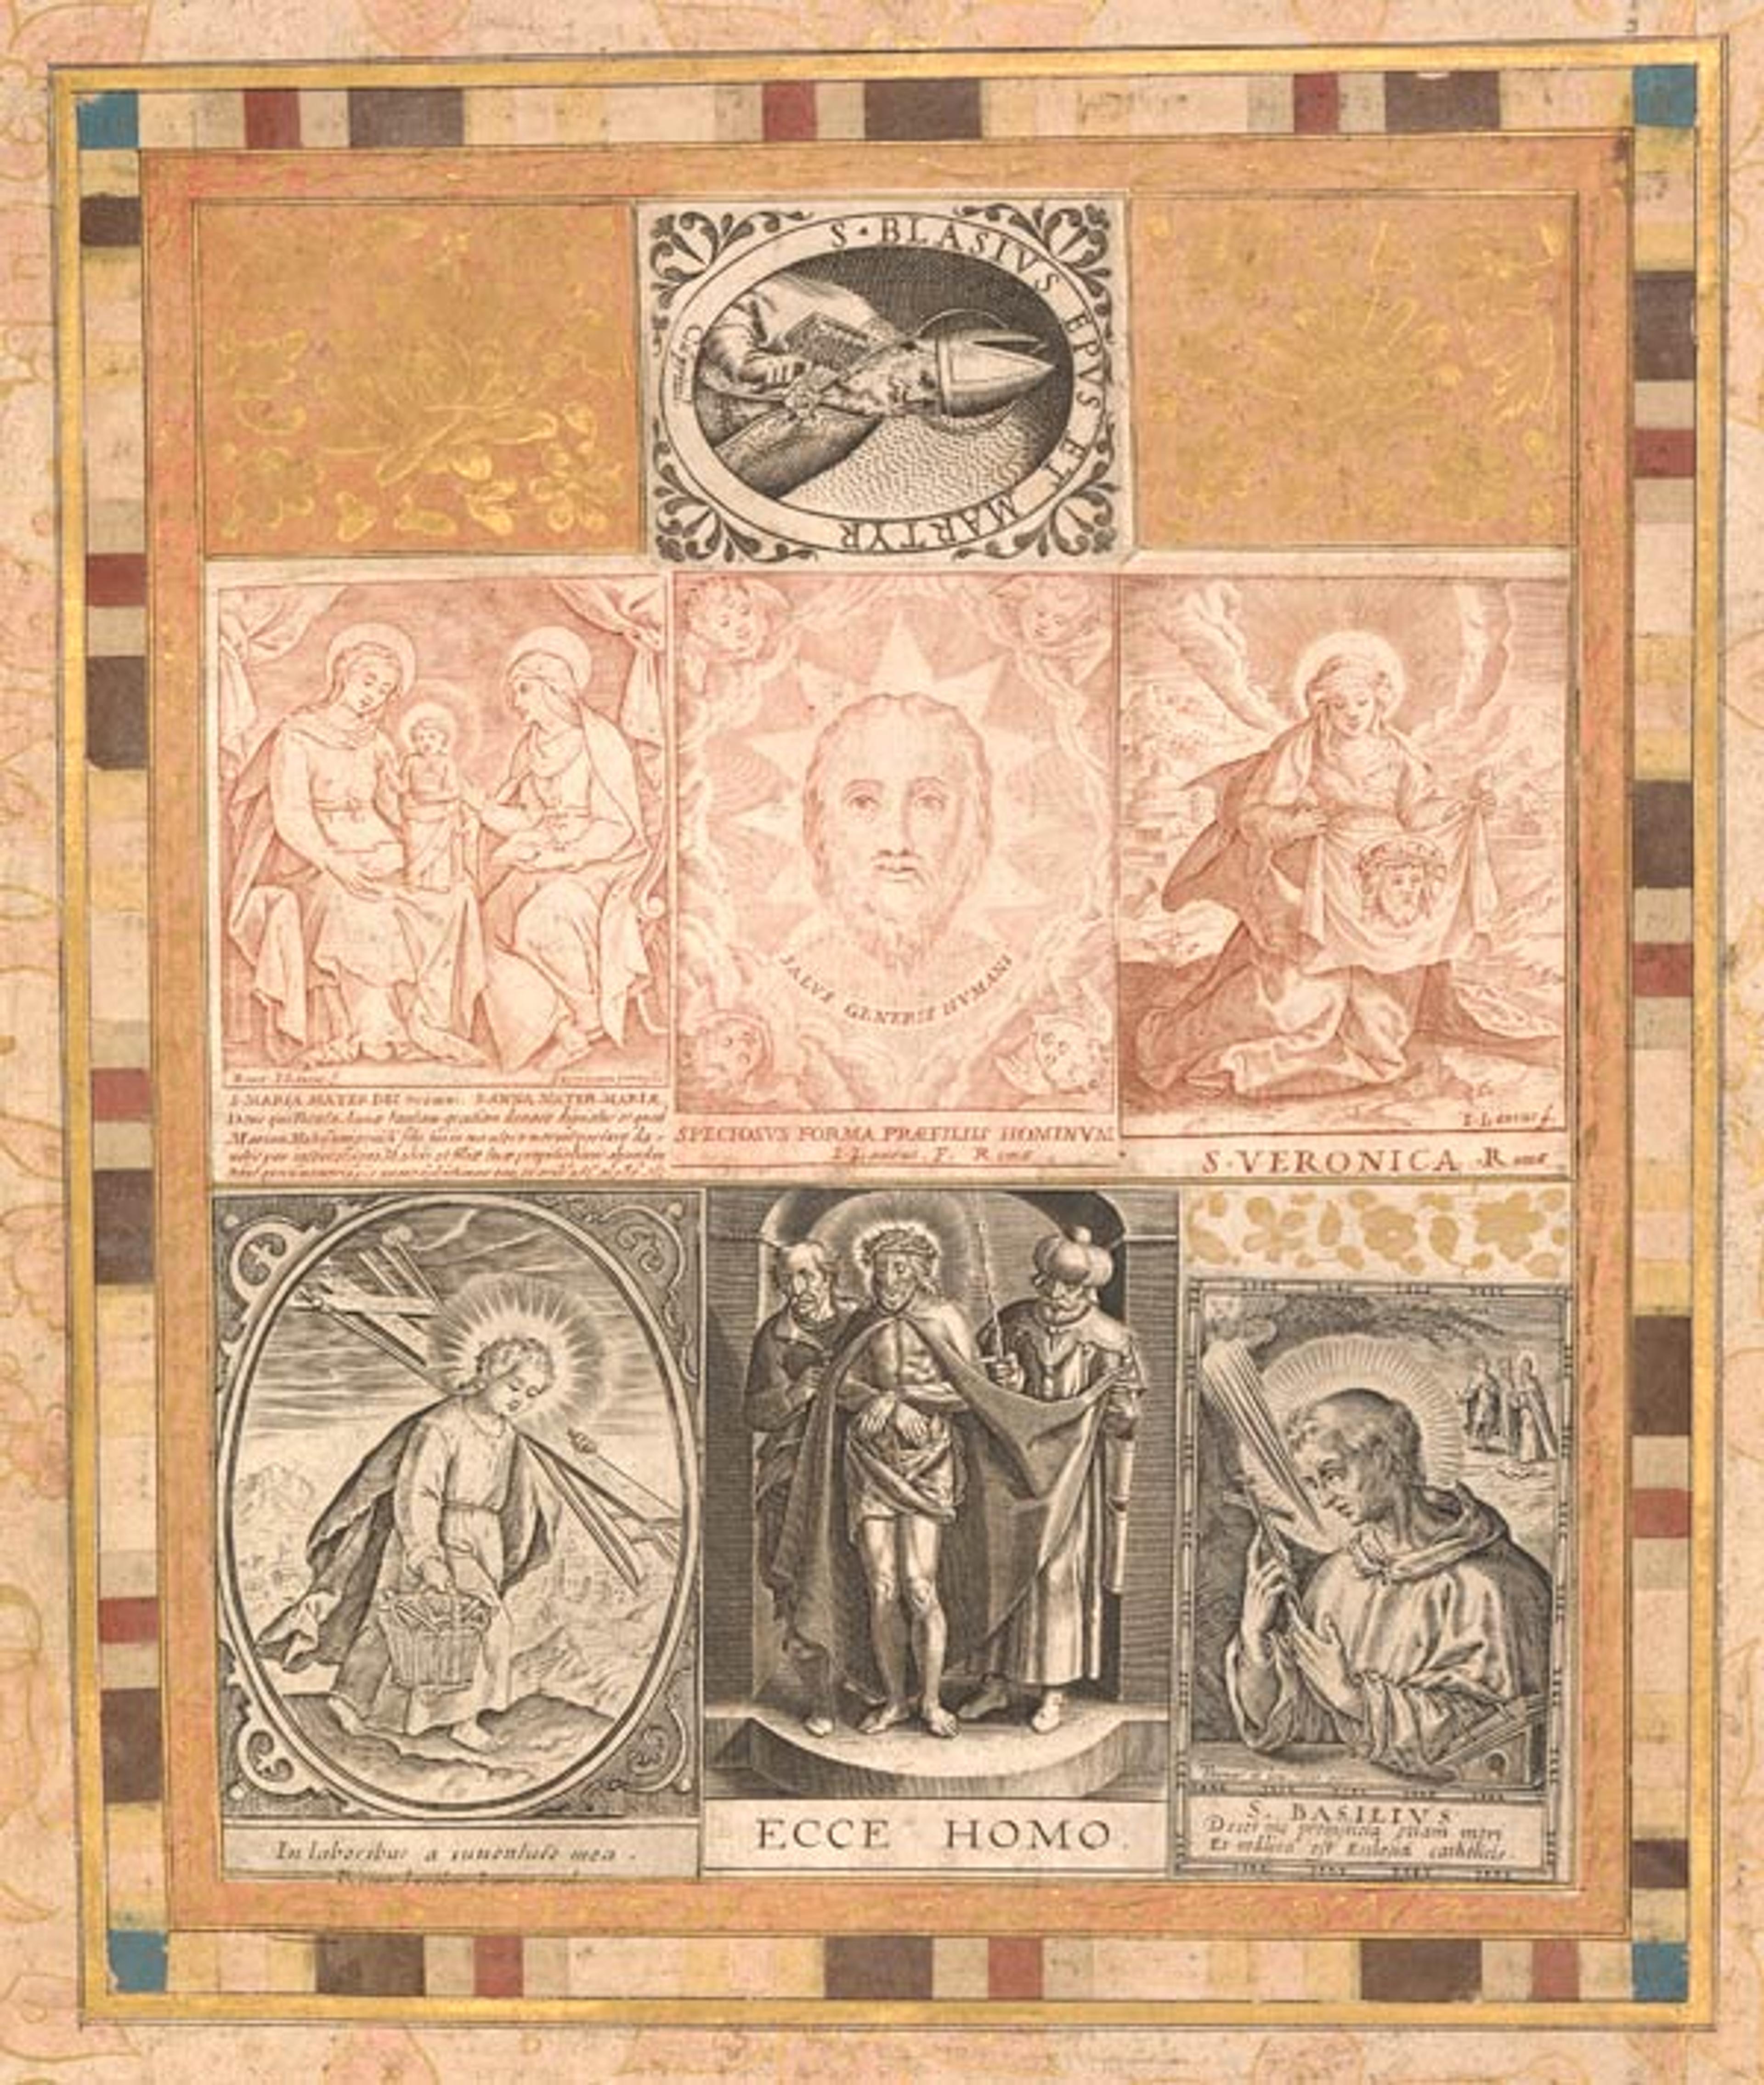 "Seven Devotional Scenes," folio from the Bellini Album, ca. 1600. Print: Italy or the Netherlands; album: Turkey. Ink, opaque watercolor, and gold on paper; H. 8 3/8 in. (21.2 cm), W. 6 3/4 in. (17.2 cm). The Metropolitan Museum of Art, New York, Louis V. Bell Fund, 1967 (67.266.7.4r)